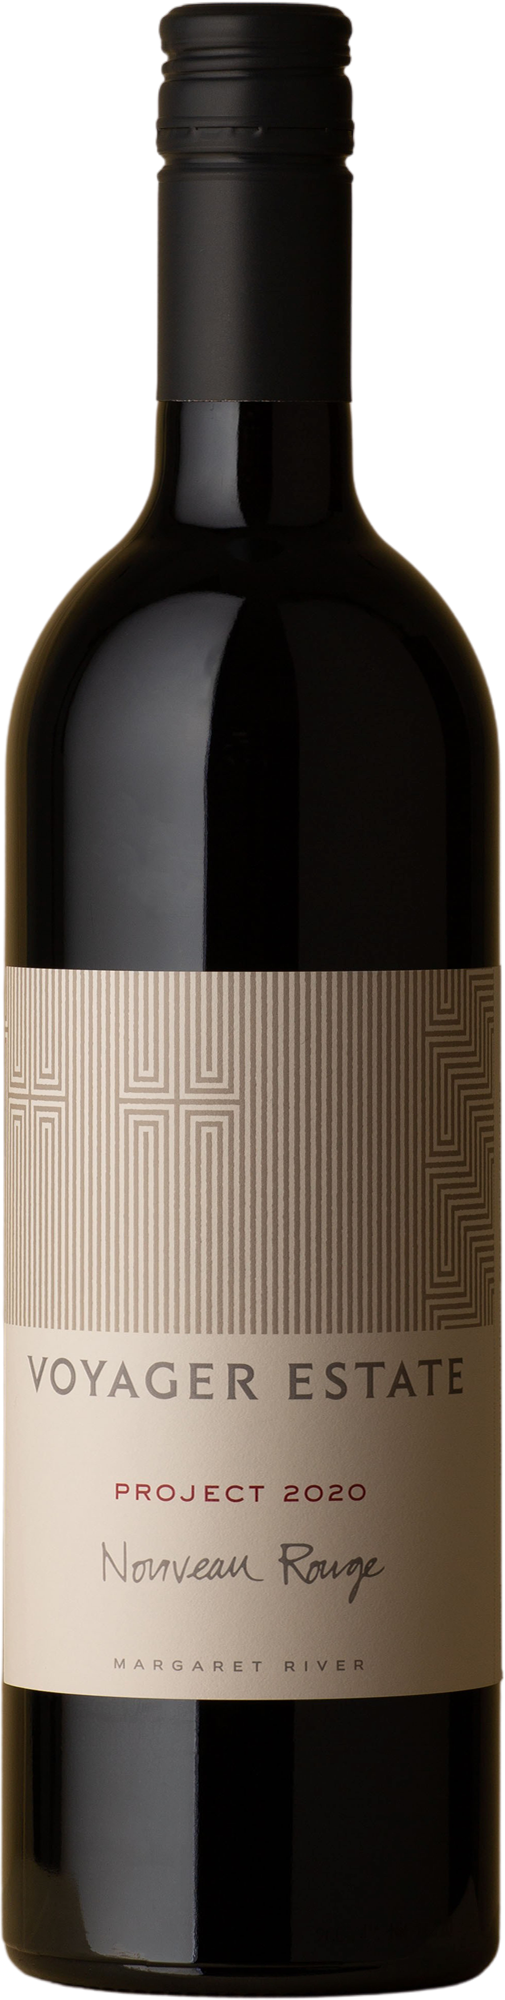 Voyager Estate - Project Nouveau Red Blend 2020 Red Wine